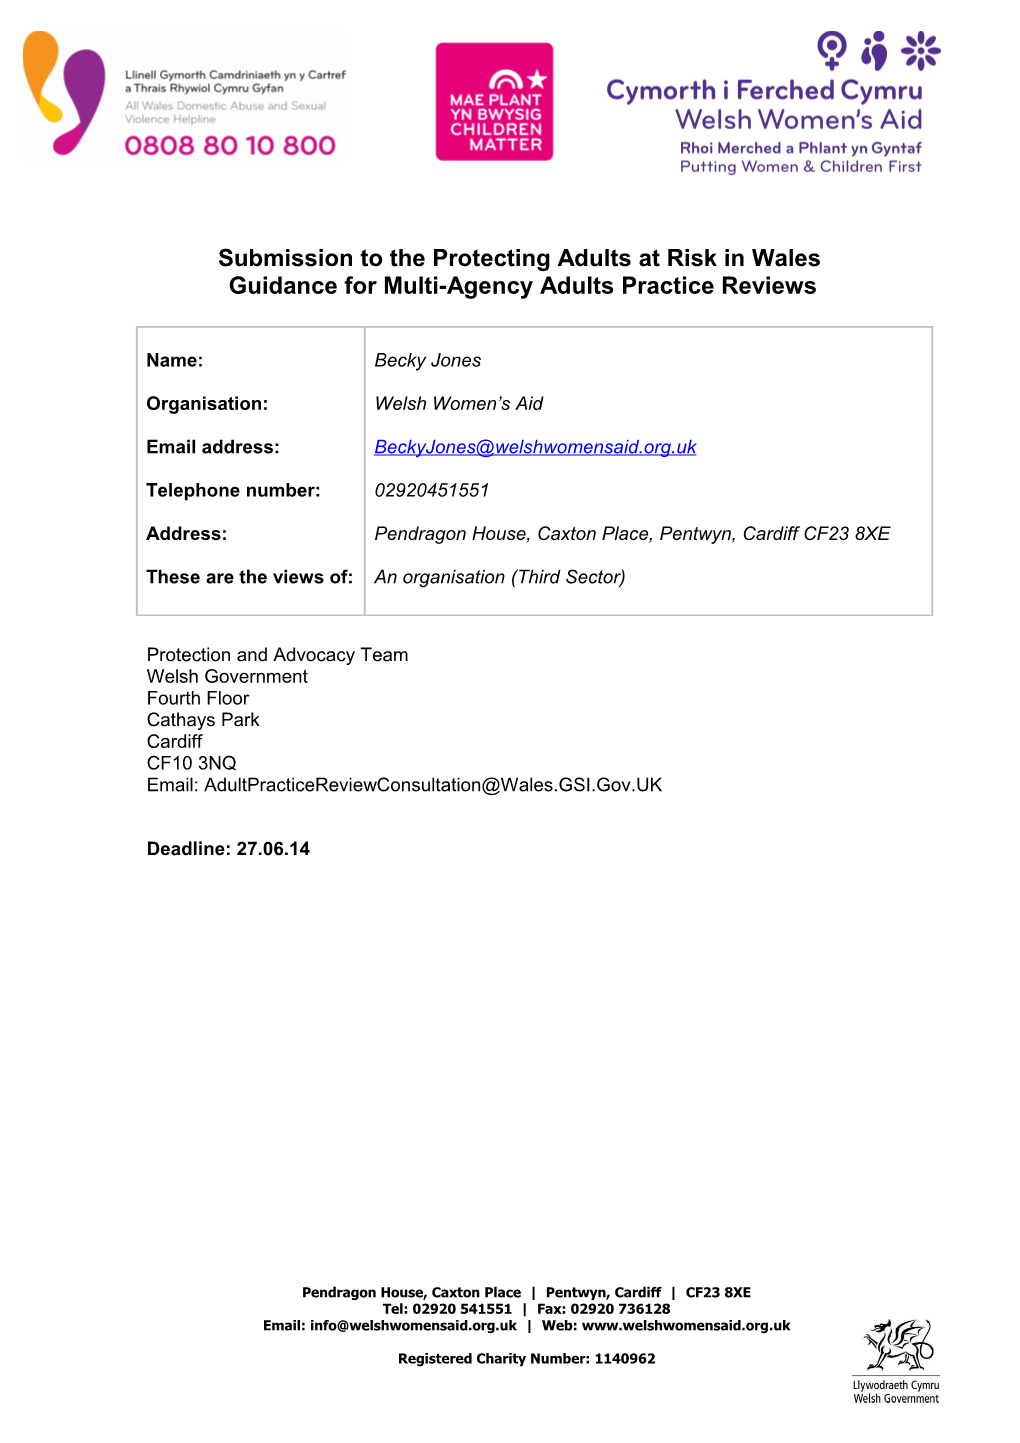 Submission to the Protecting Adults at Risk in Wales